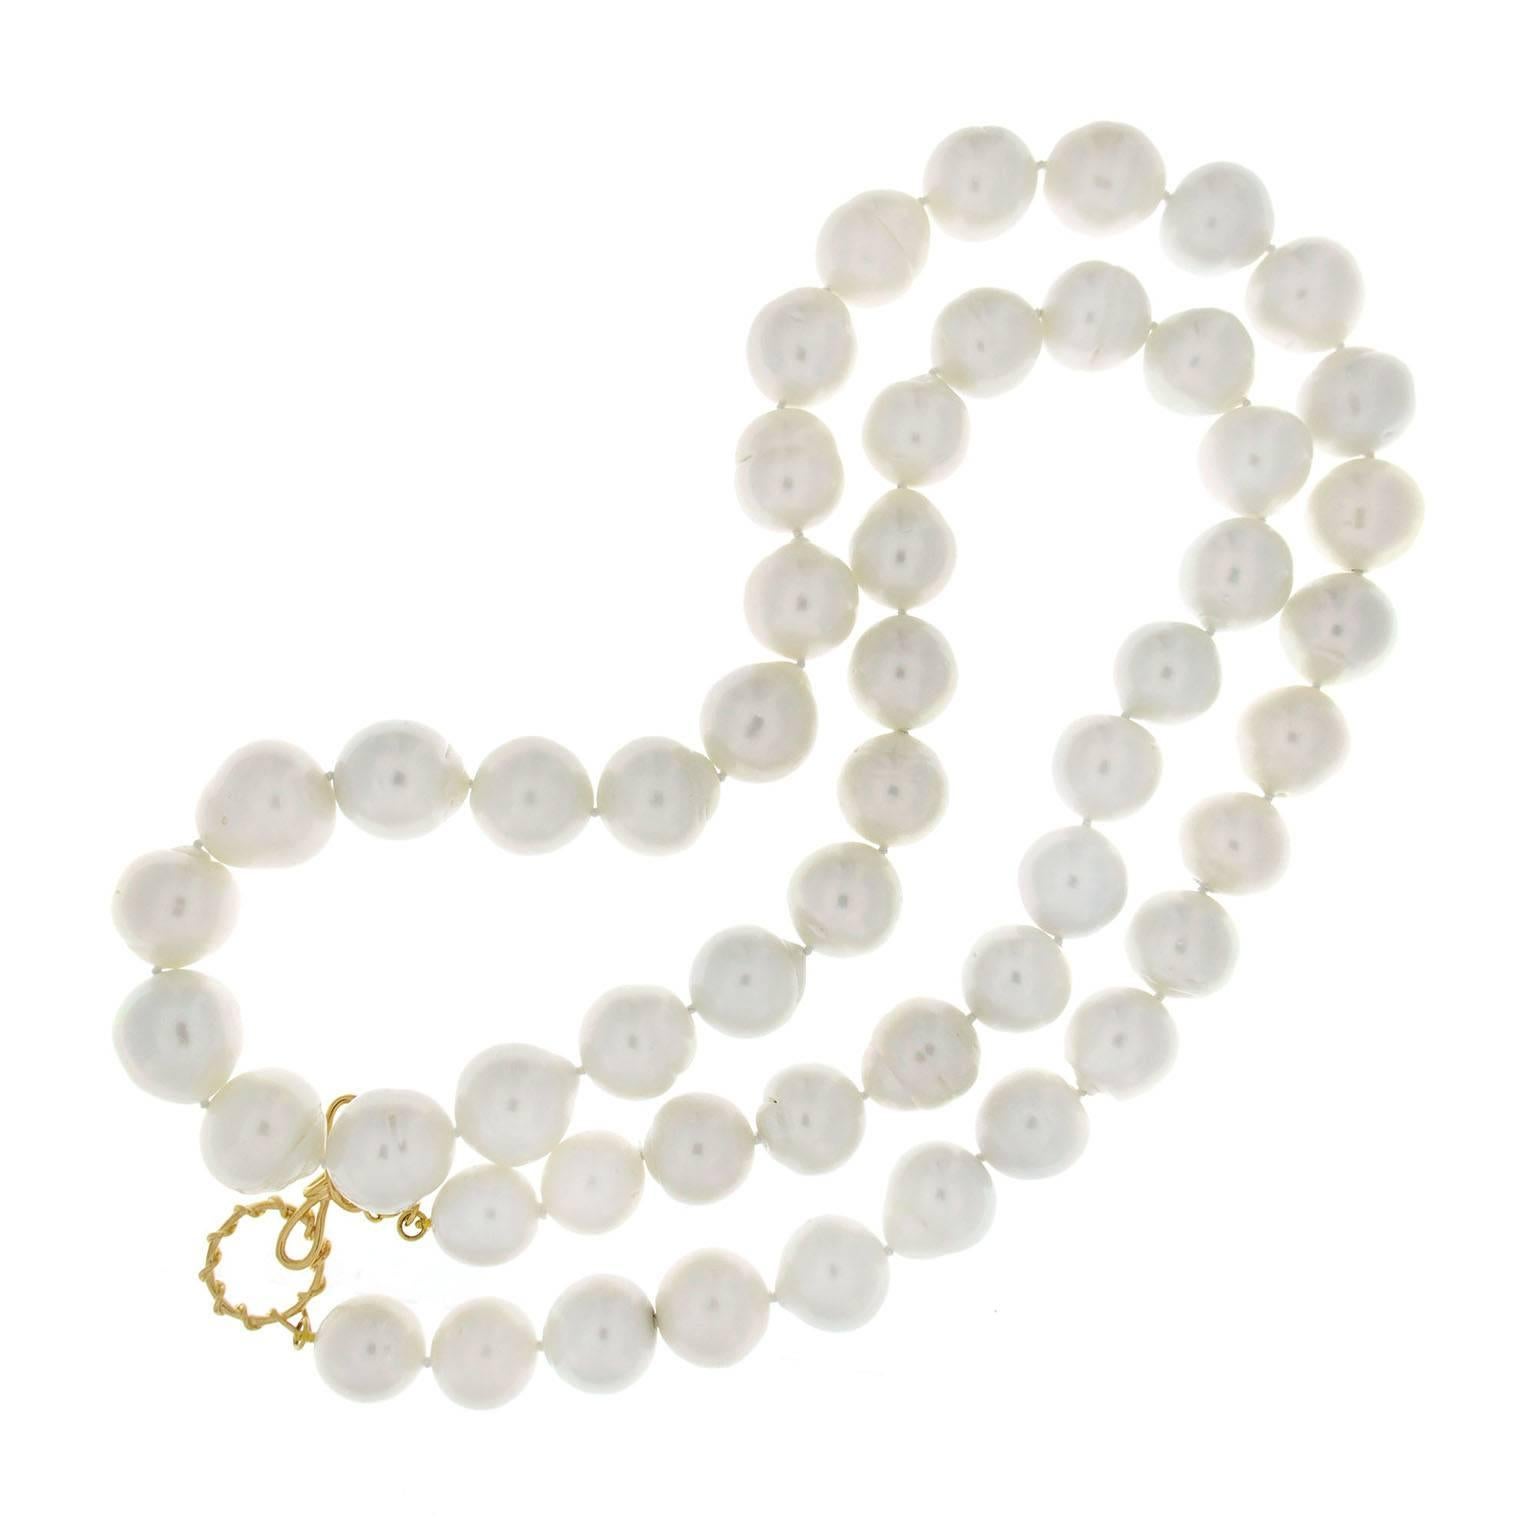 This exquisite necklace features 53 Baroque South Sea pearls ranging from  18.1 x  15.0mm. The necklace is 37 inches long with 18K yellow gold knot ring and toggle.